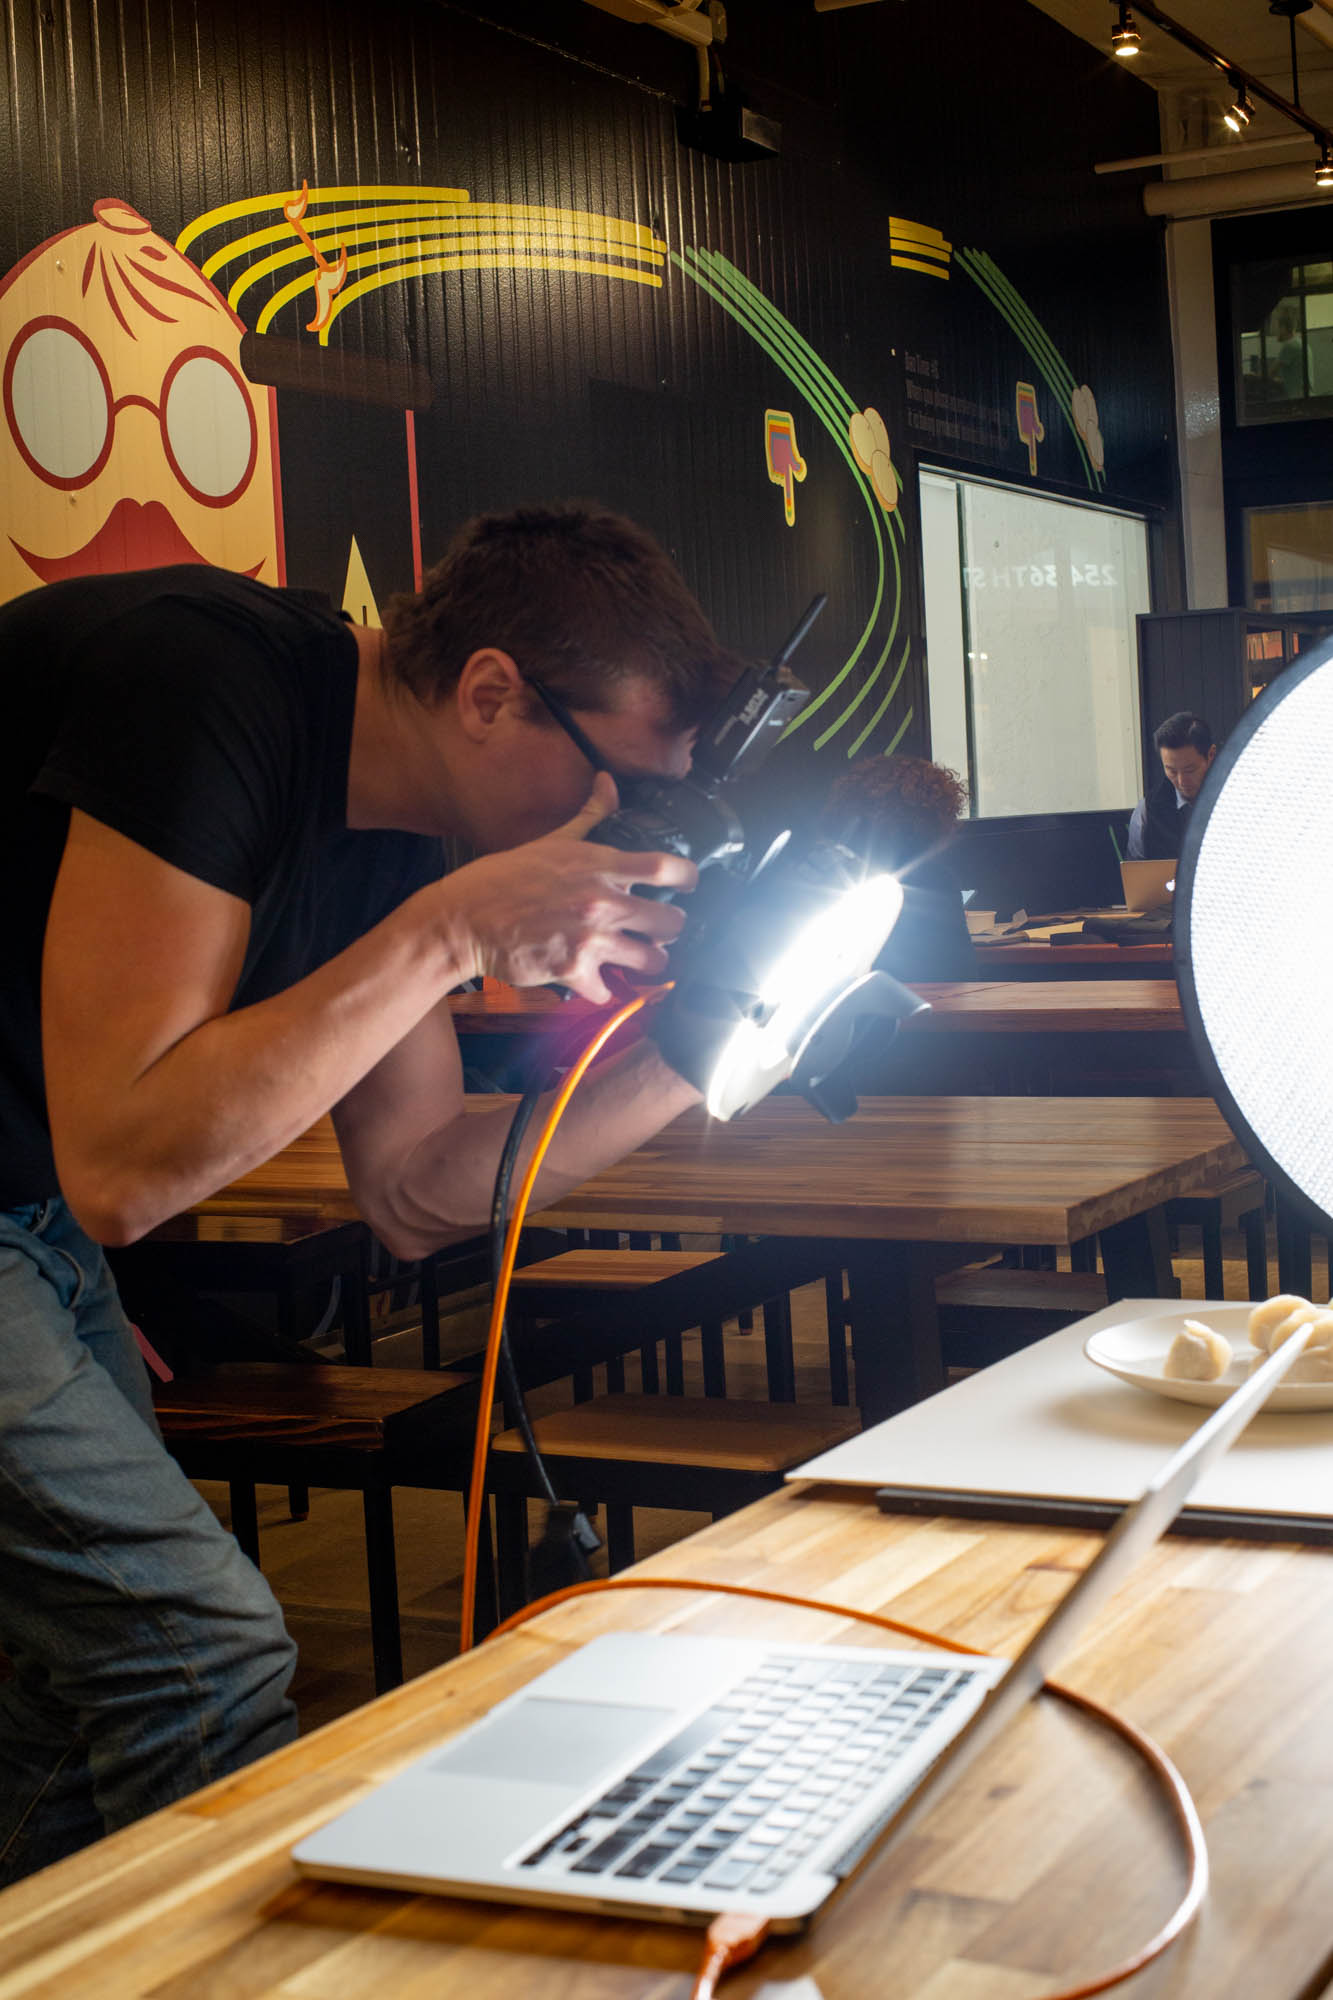 will engelmann taking photographs with a ring light